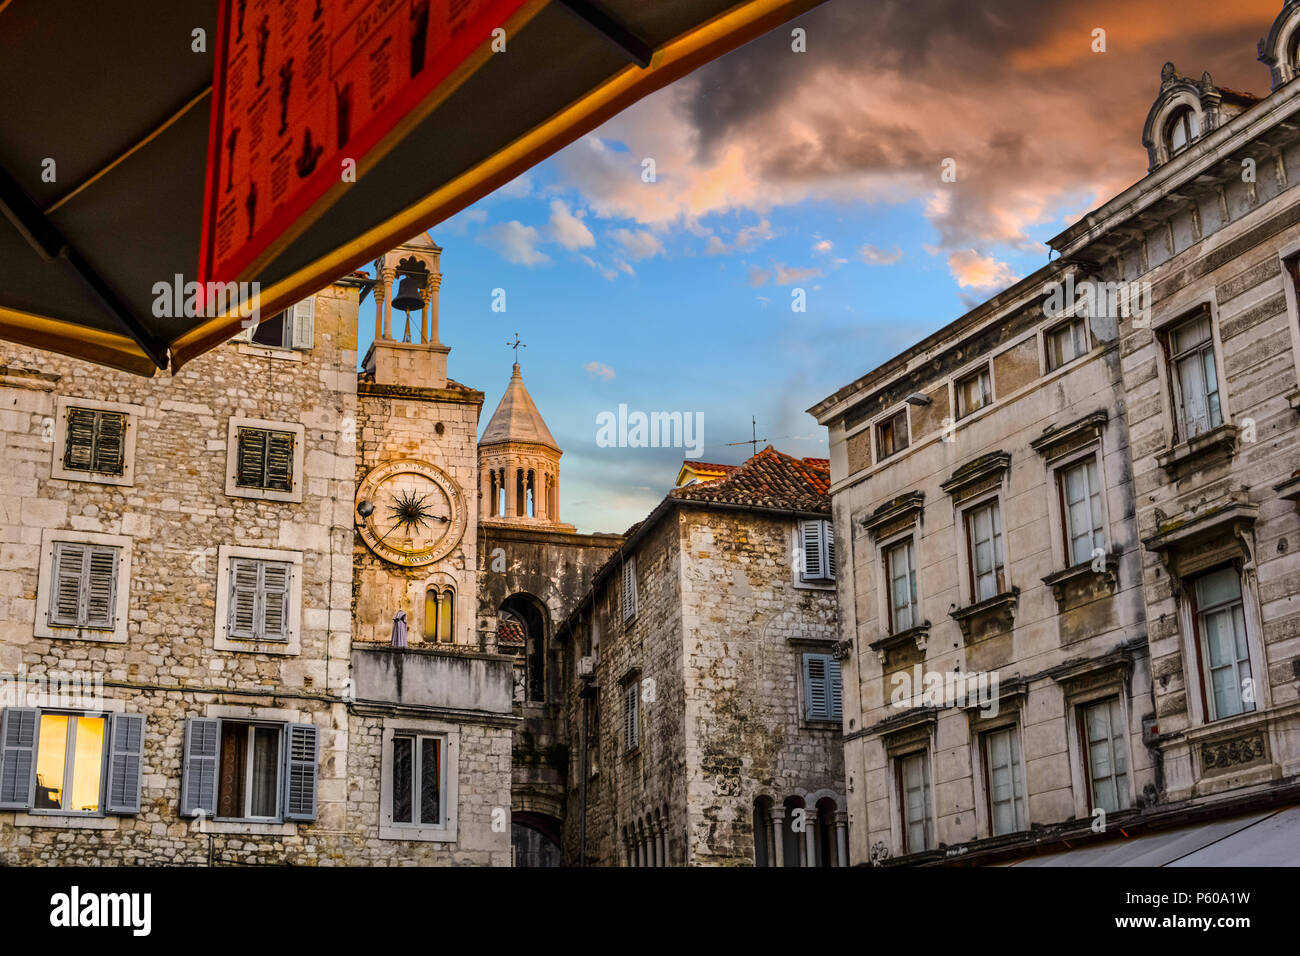 The bell and cathedral tower reflect the colorful clouds as the sun sets on People's Square at Diocletian's Palace in Split Croatia Stock Photo